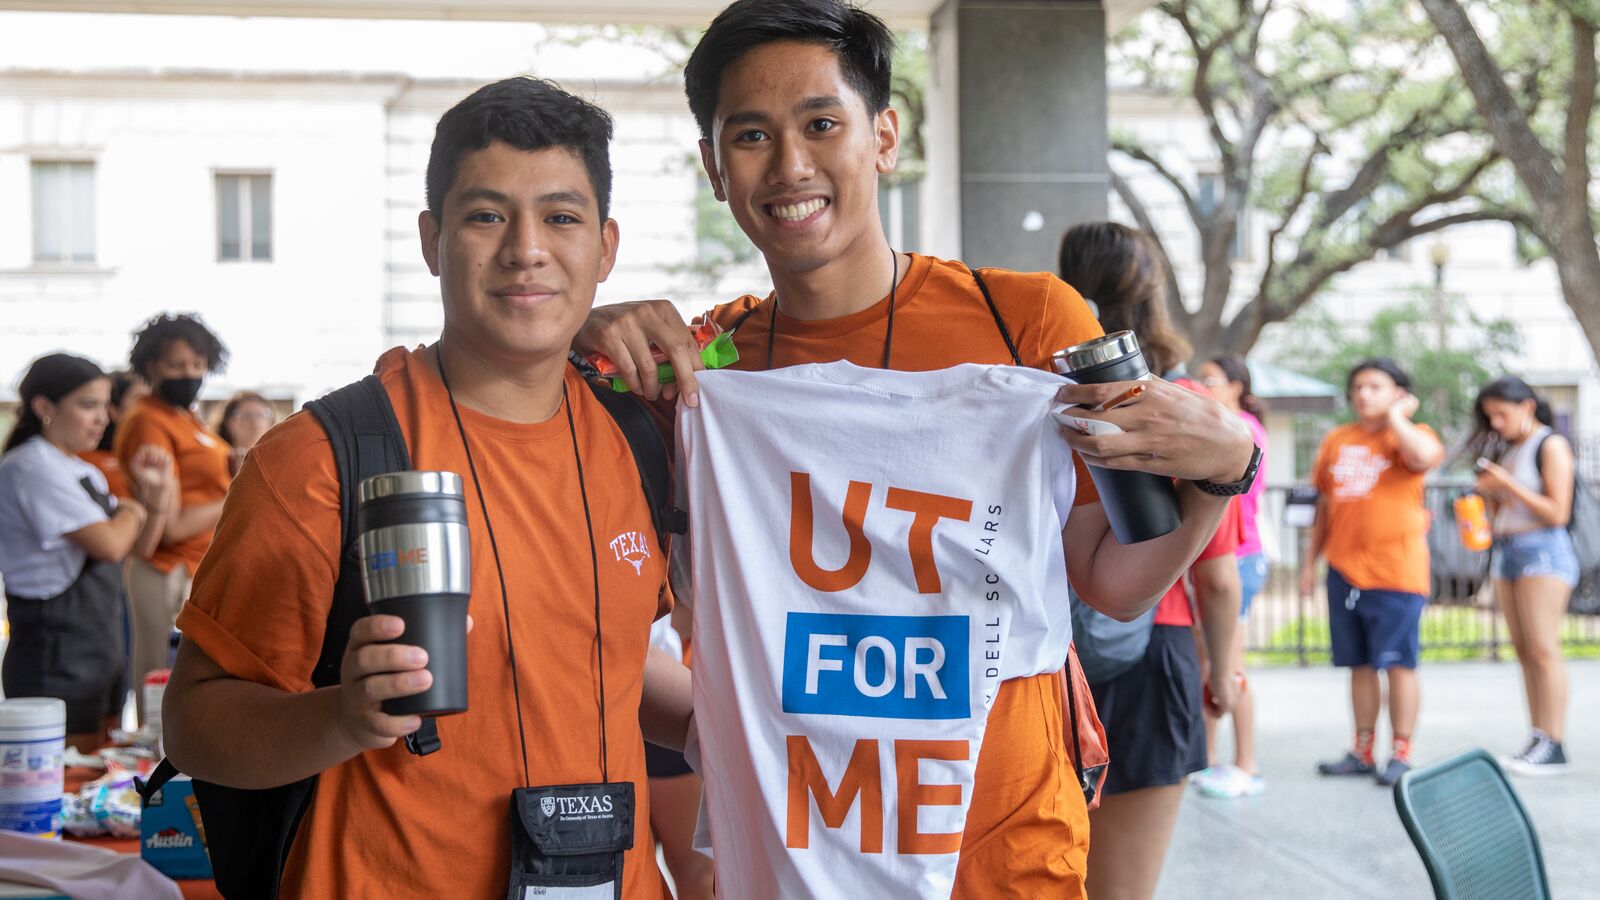 Two smiling young men in UT orange shirts at UT for Me orientation event.